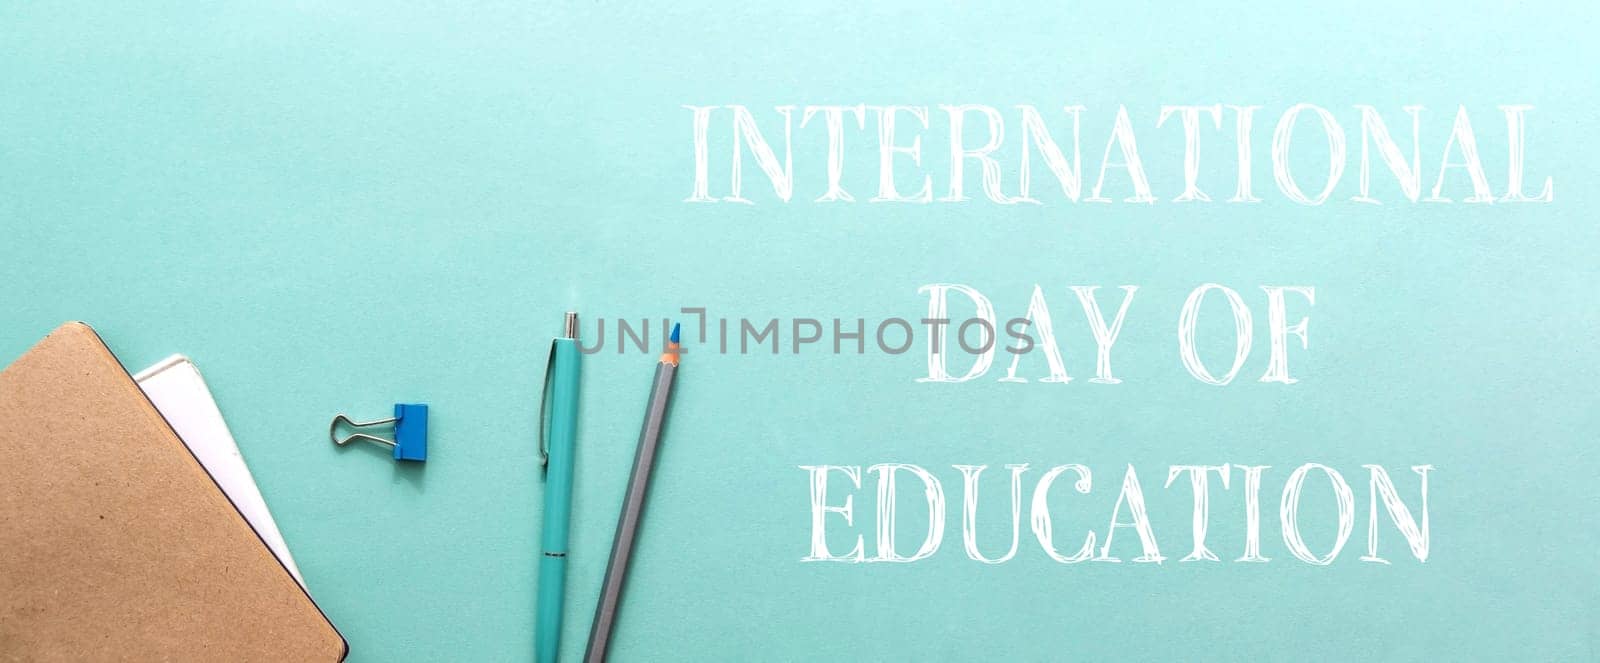 A blue background with a pencil and pen on it. The words International Day of Education are written below the pencils